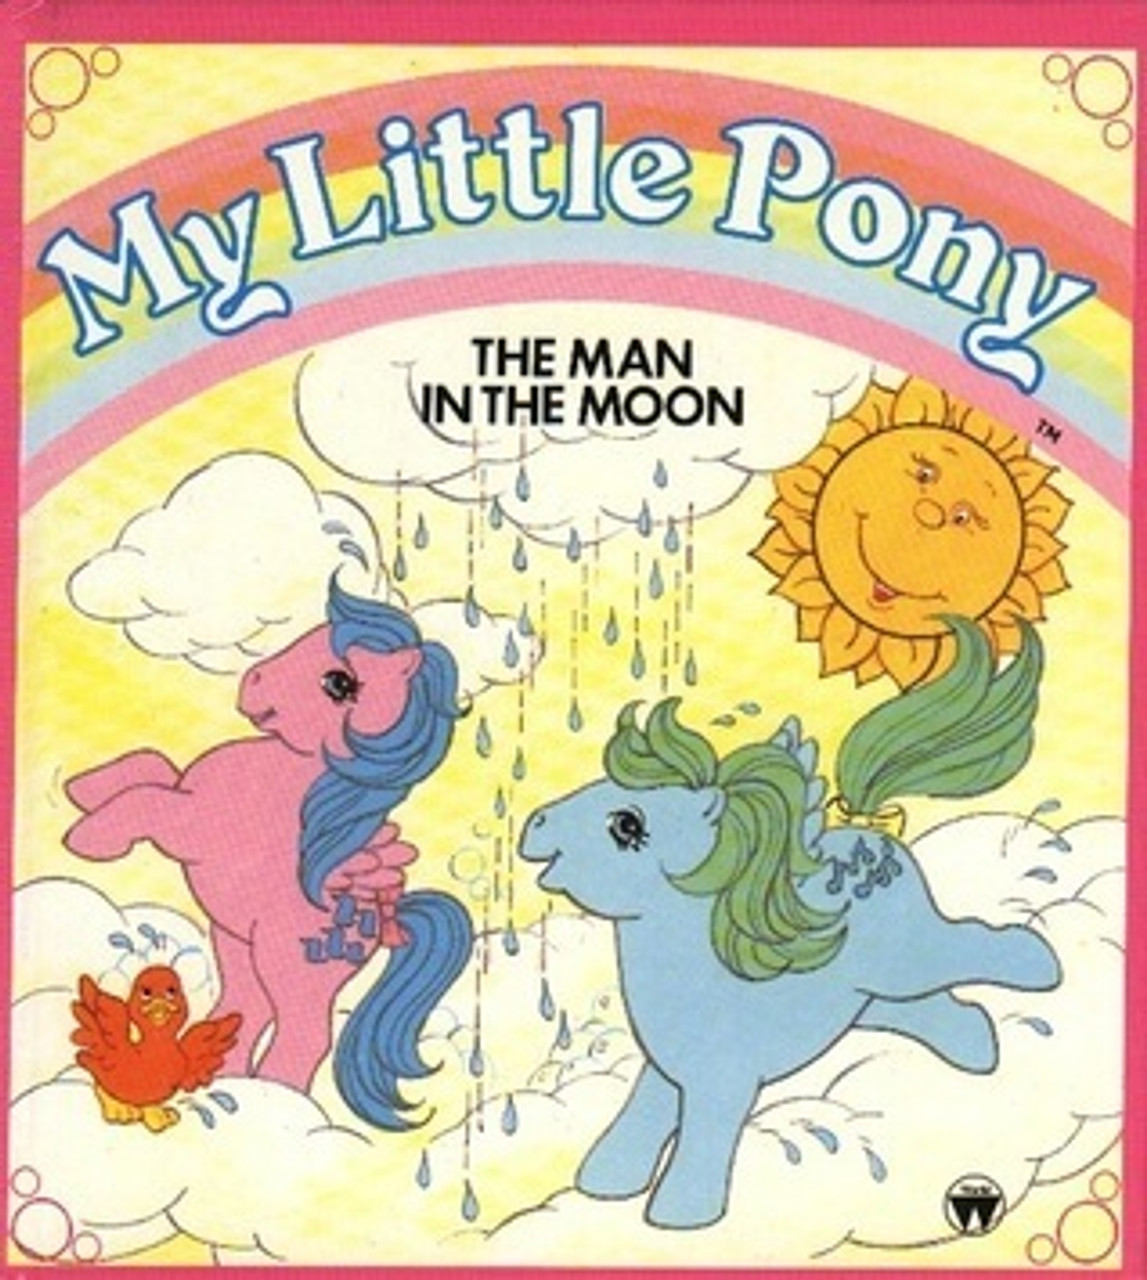 My Little Pony: The Man in the Moon (Children's Coffee Table book)